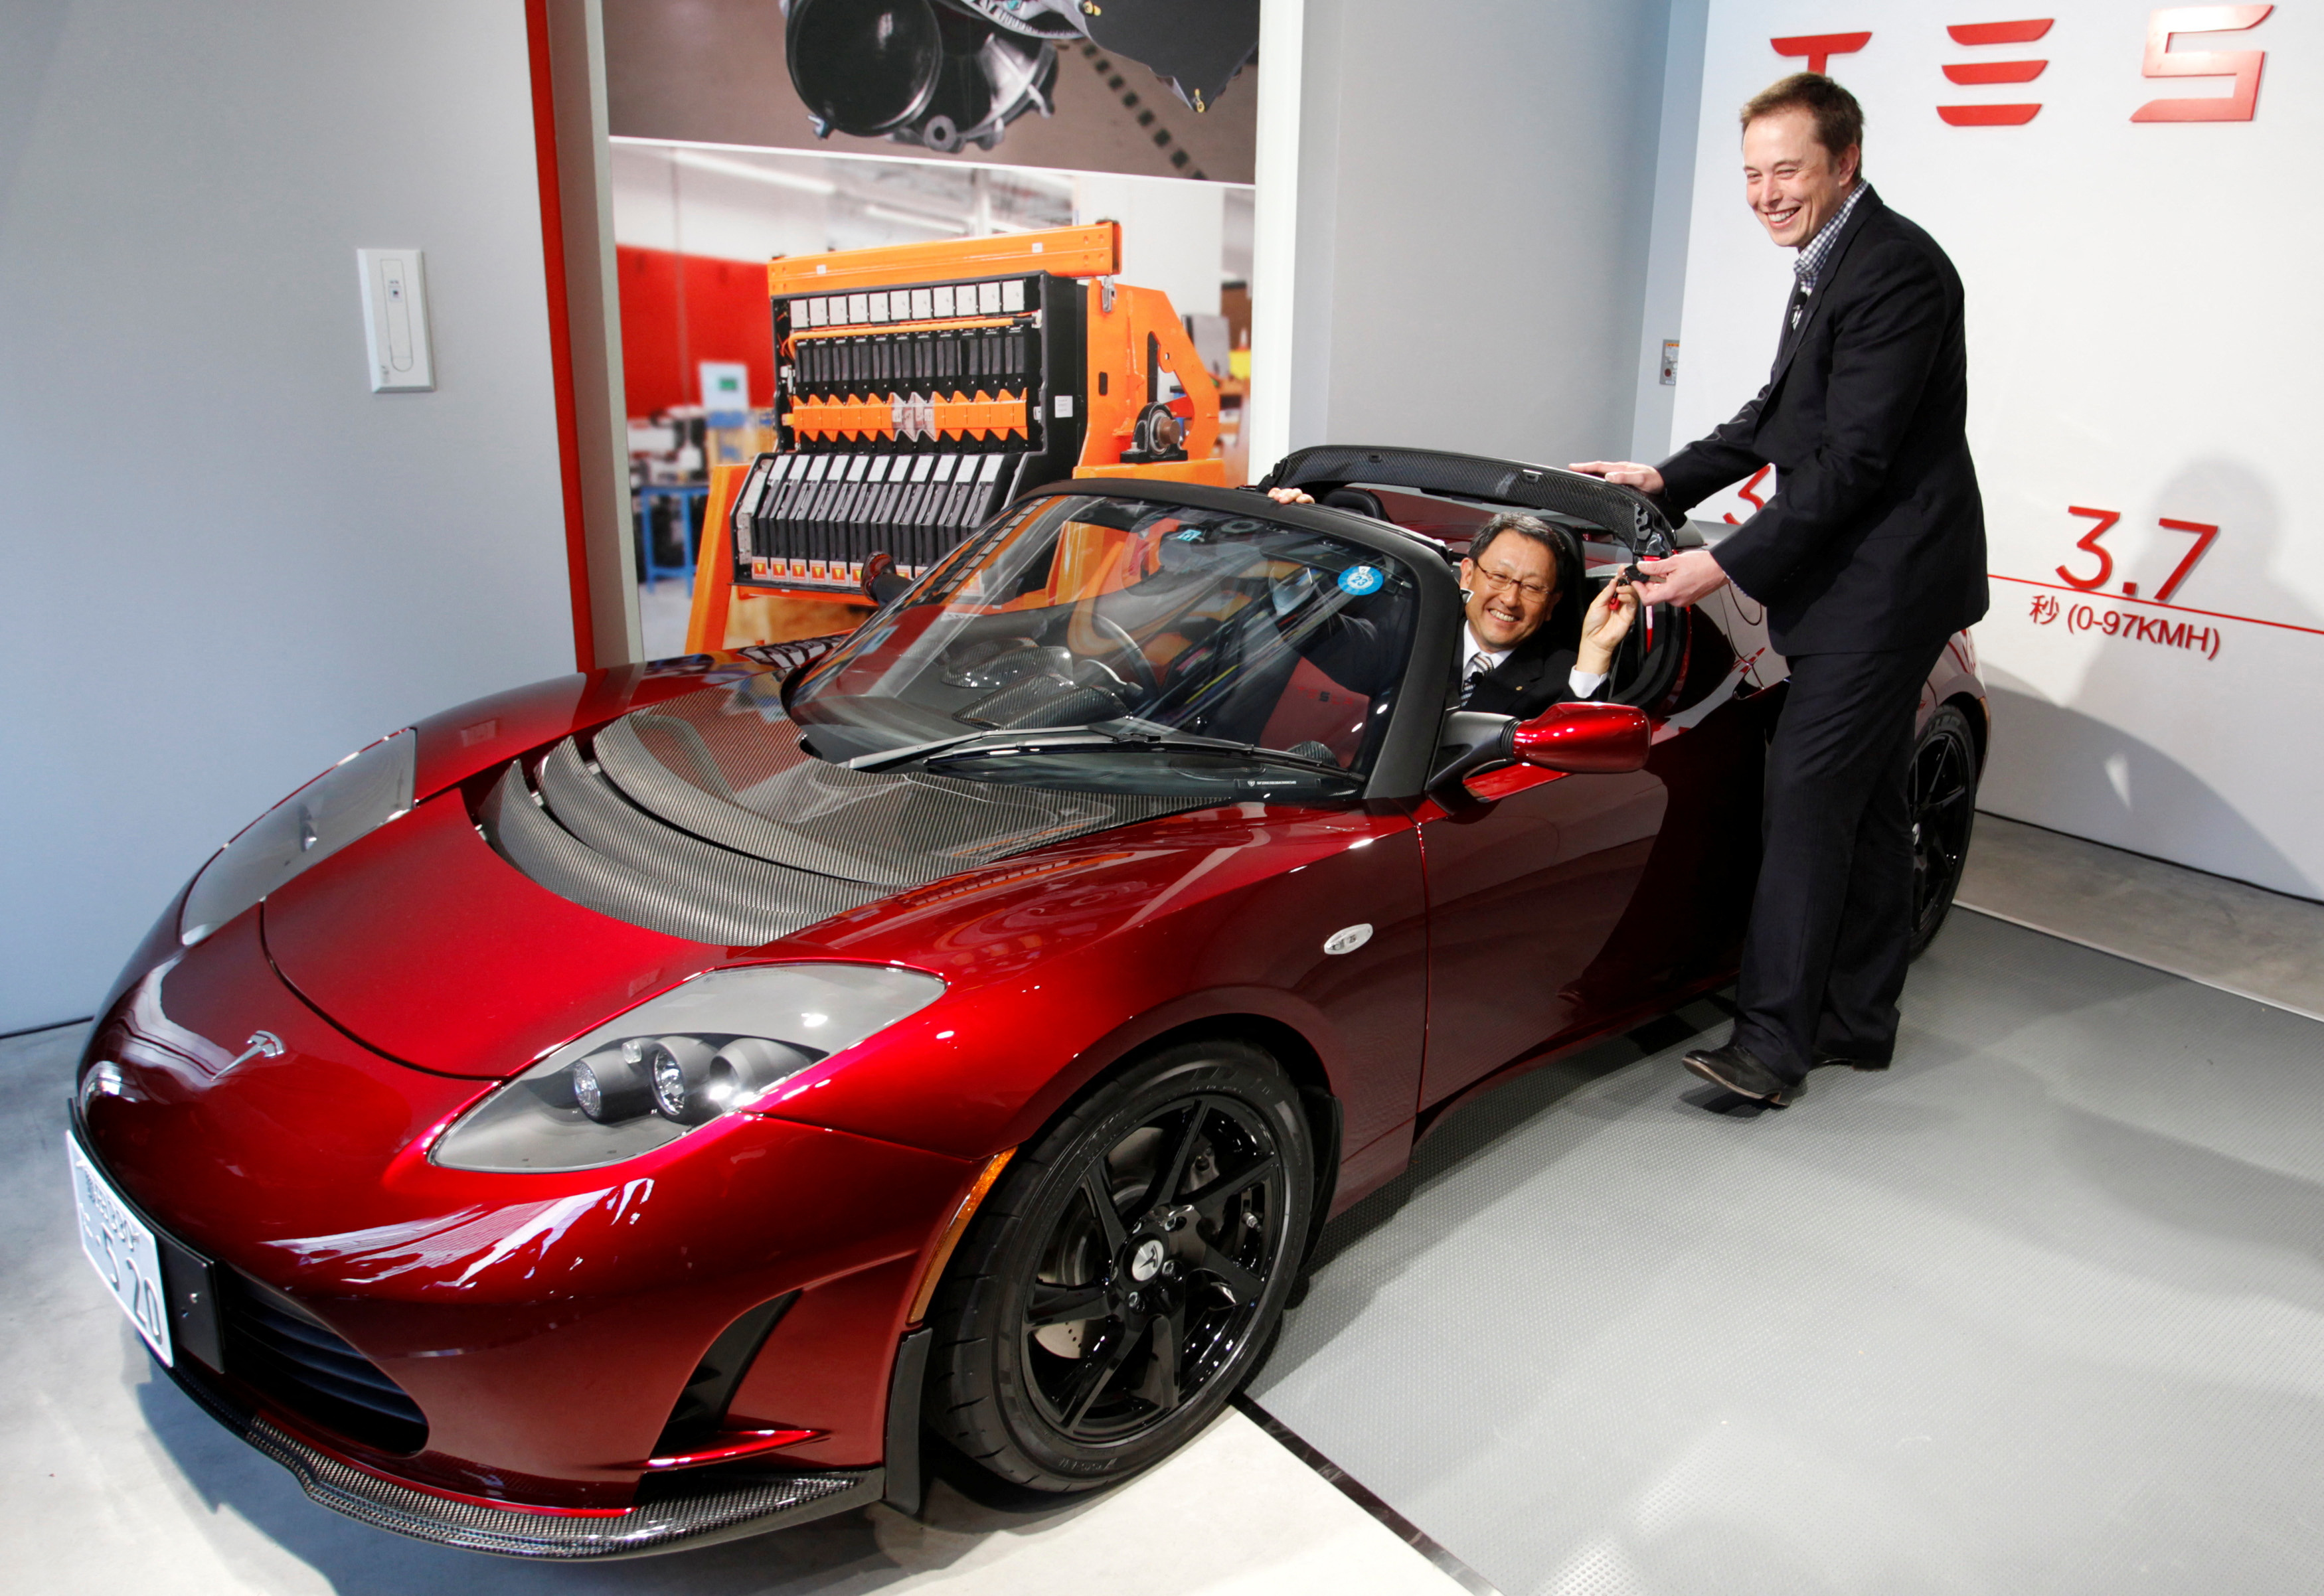 Toyota Motor Corp President Toyoda is presented with the keys to a Roadster electric car by Tesla Motor Inc CEO Musk at a news conference in Tokyo